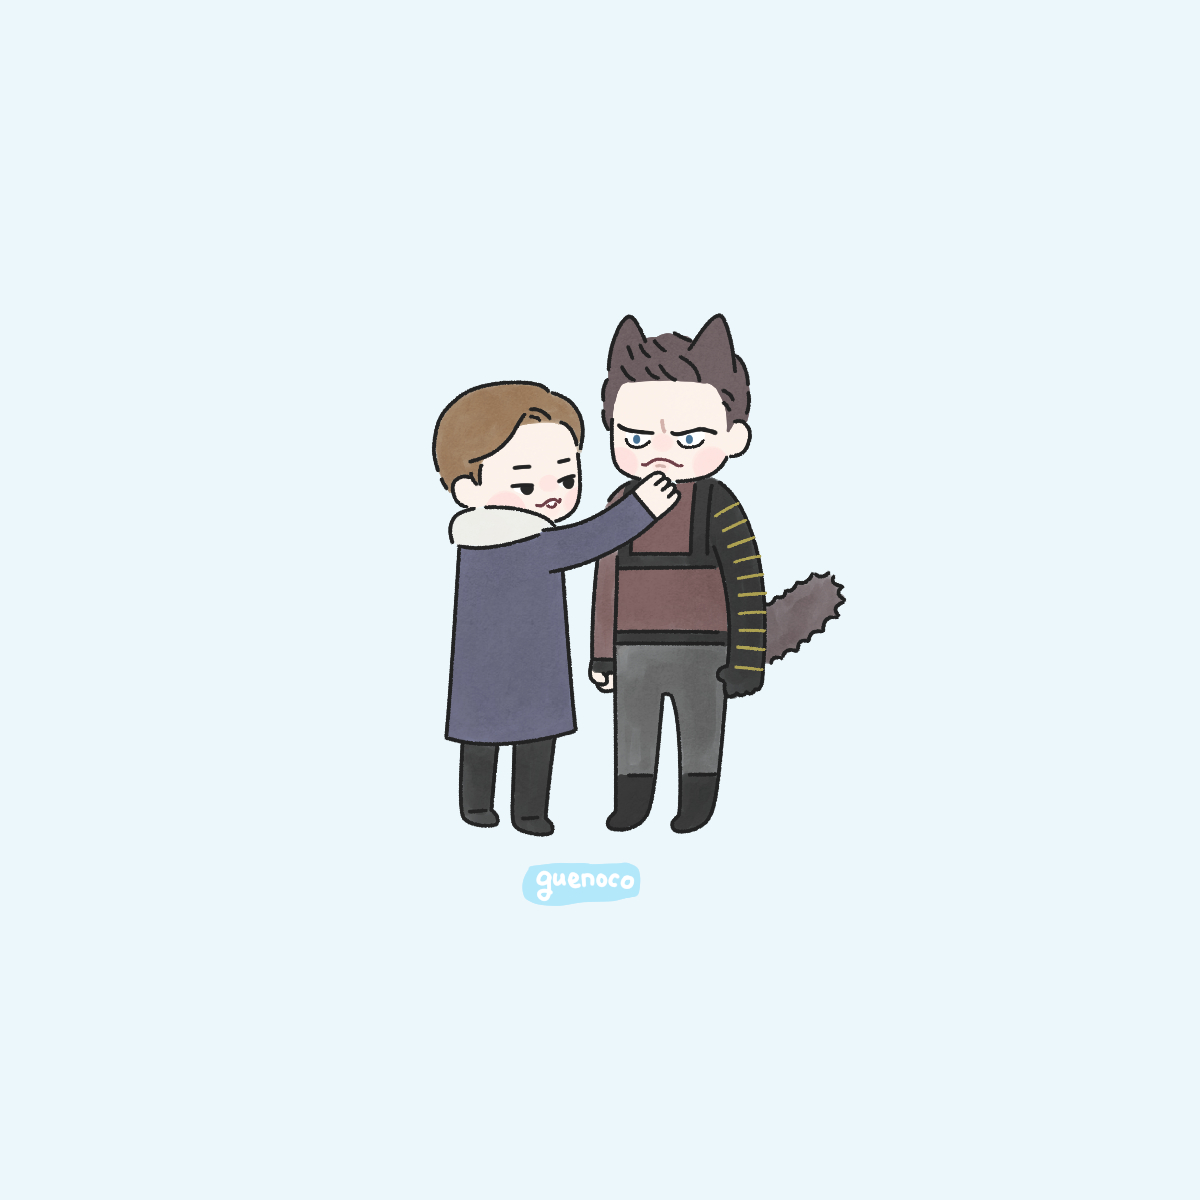 Catbucky
from The Falcon and the Winter Soldier

#buckybarnes #wintersoldier #fatws
#TheFalconandtheWinterSoldier